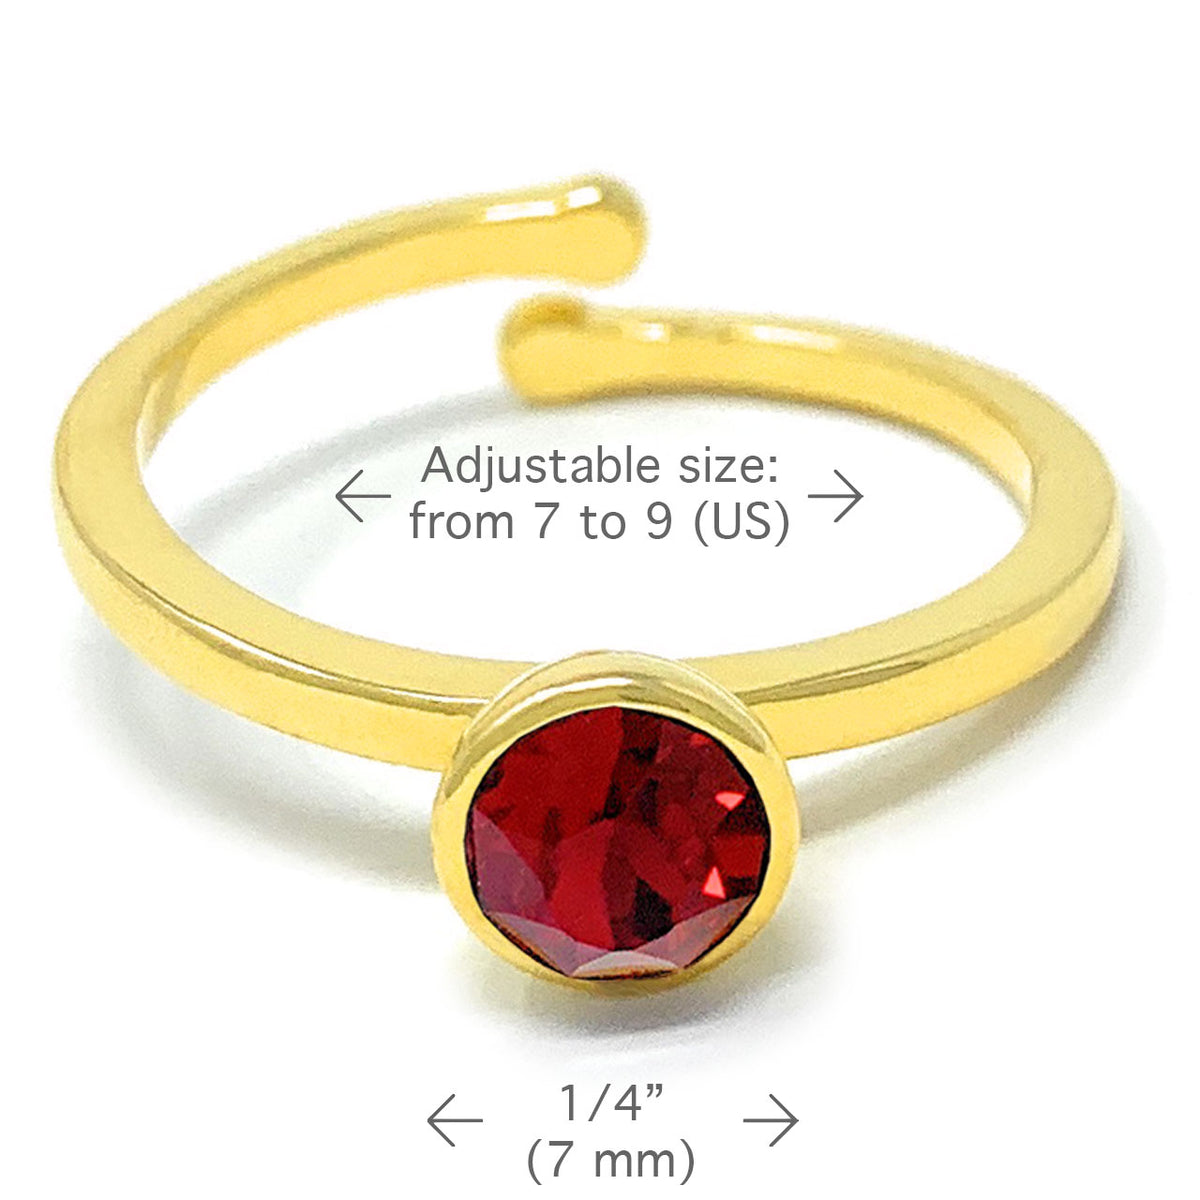 Harley Adjustable Ring with Red Siam Round Crystals from Swarovski Gold Plated - Ed Heart